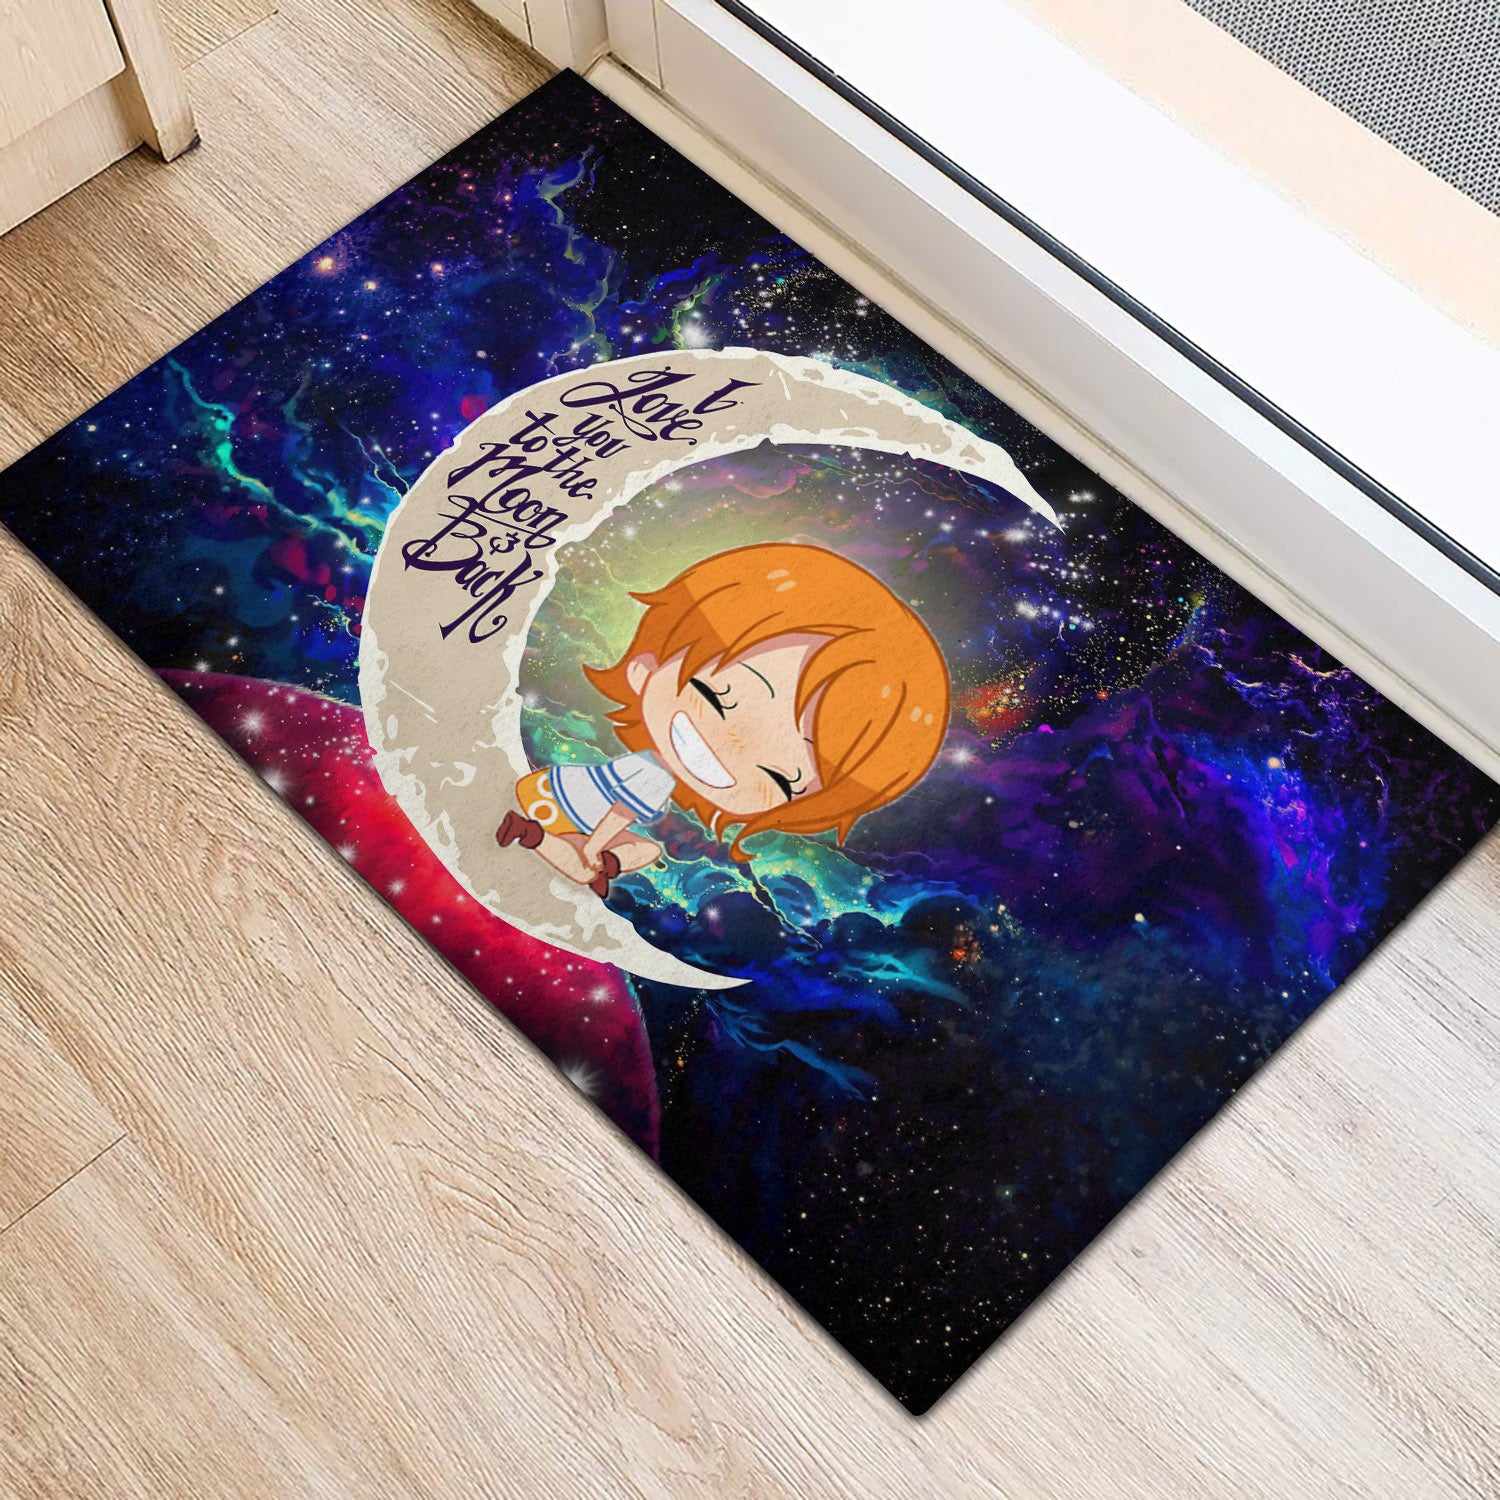 Nami One Piece Love You To The Moon Galaxy Back Door Mats Home Decor